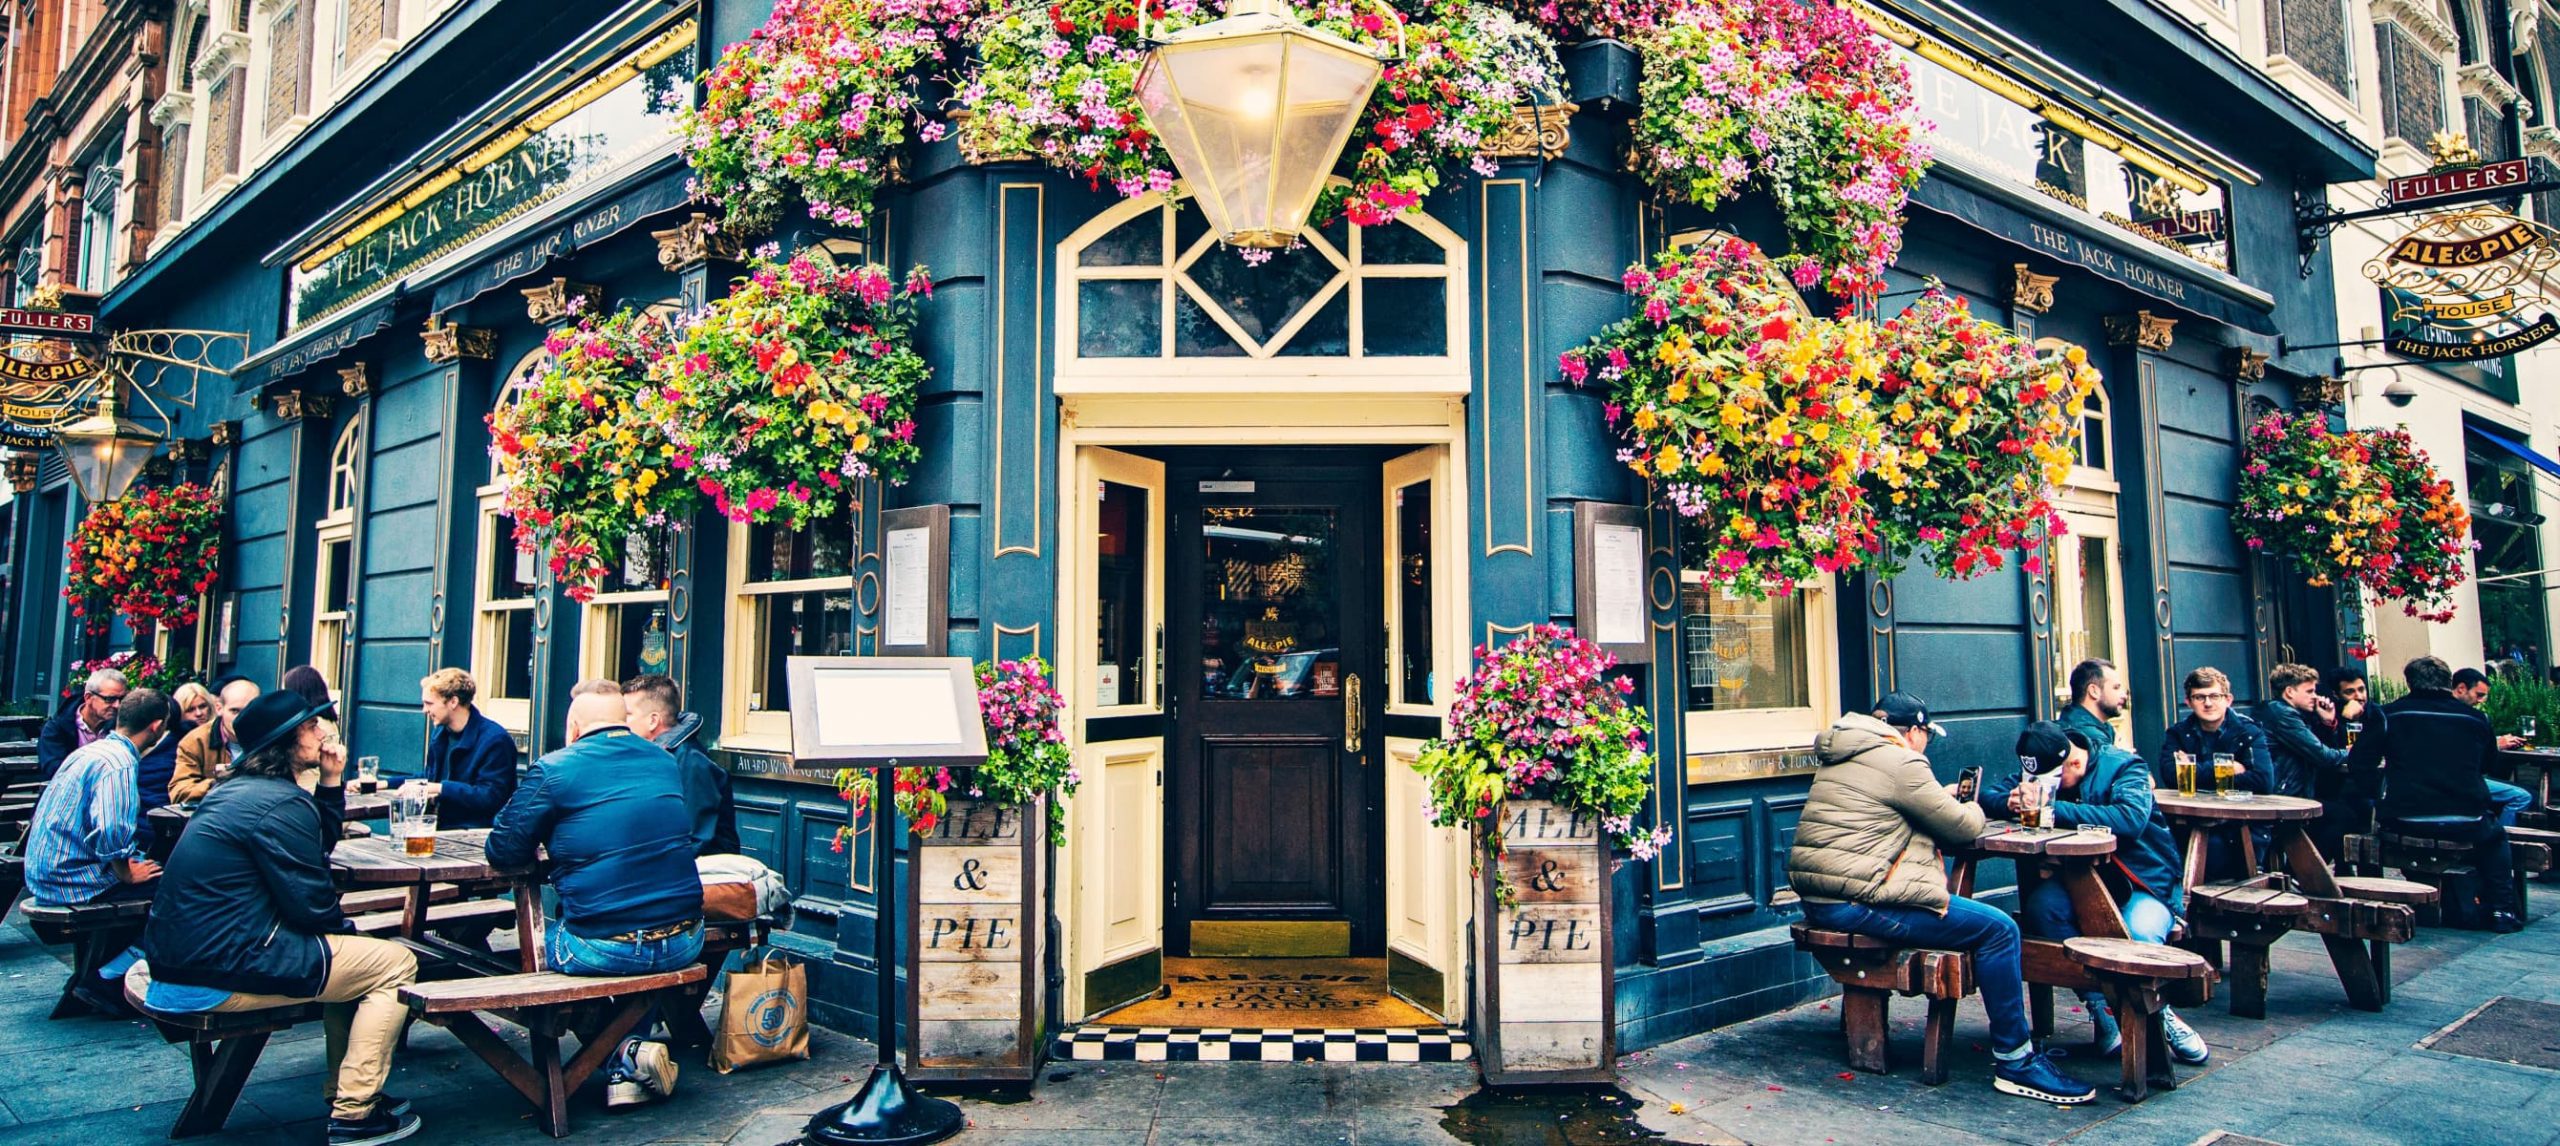 A Comprehensive Guide To The Best Pubs In London